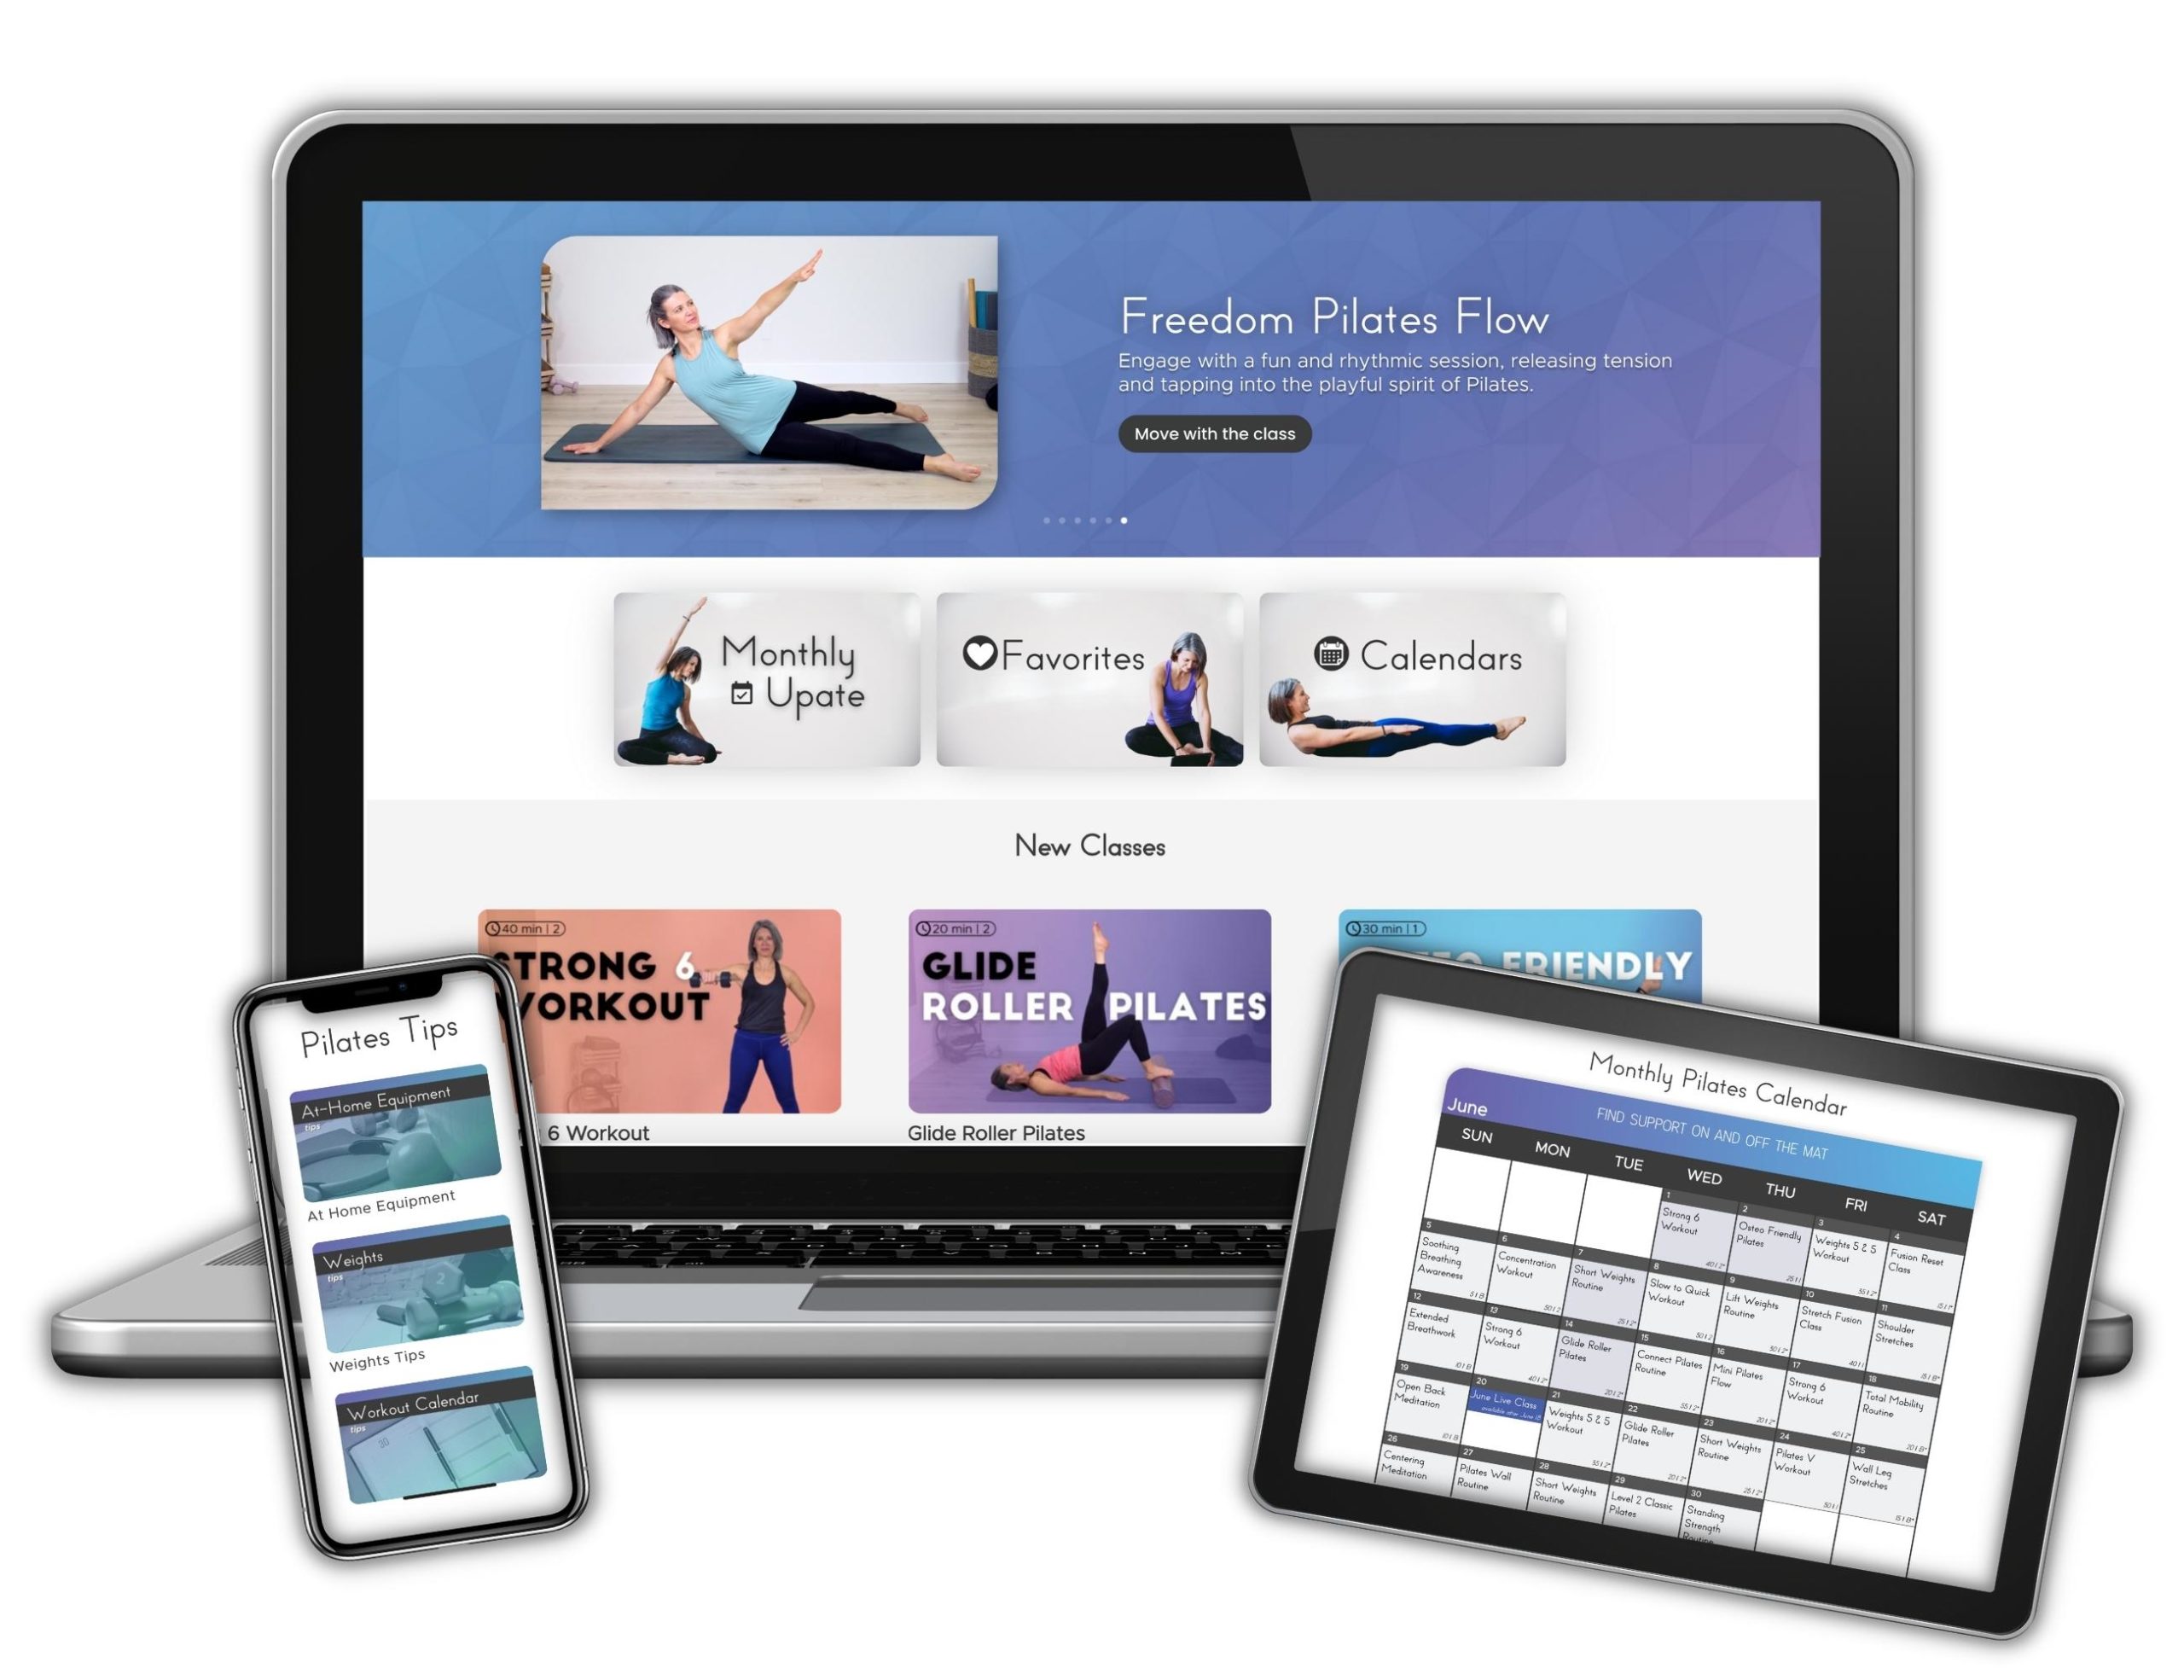 Computer showcasing Trifecta Pilates Membership dashboard with featured class on top, Monthly Update, Favorites, Calendars icons in second row and New Classes featured in third row. On left bottom i-phone image with Pilates Tips images. On bottom right, Monthly Calendar